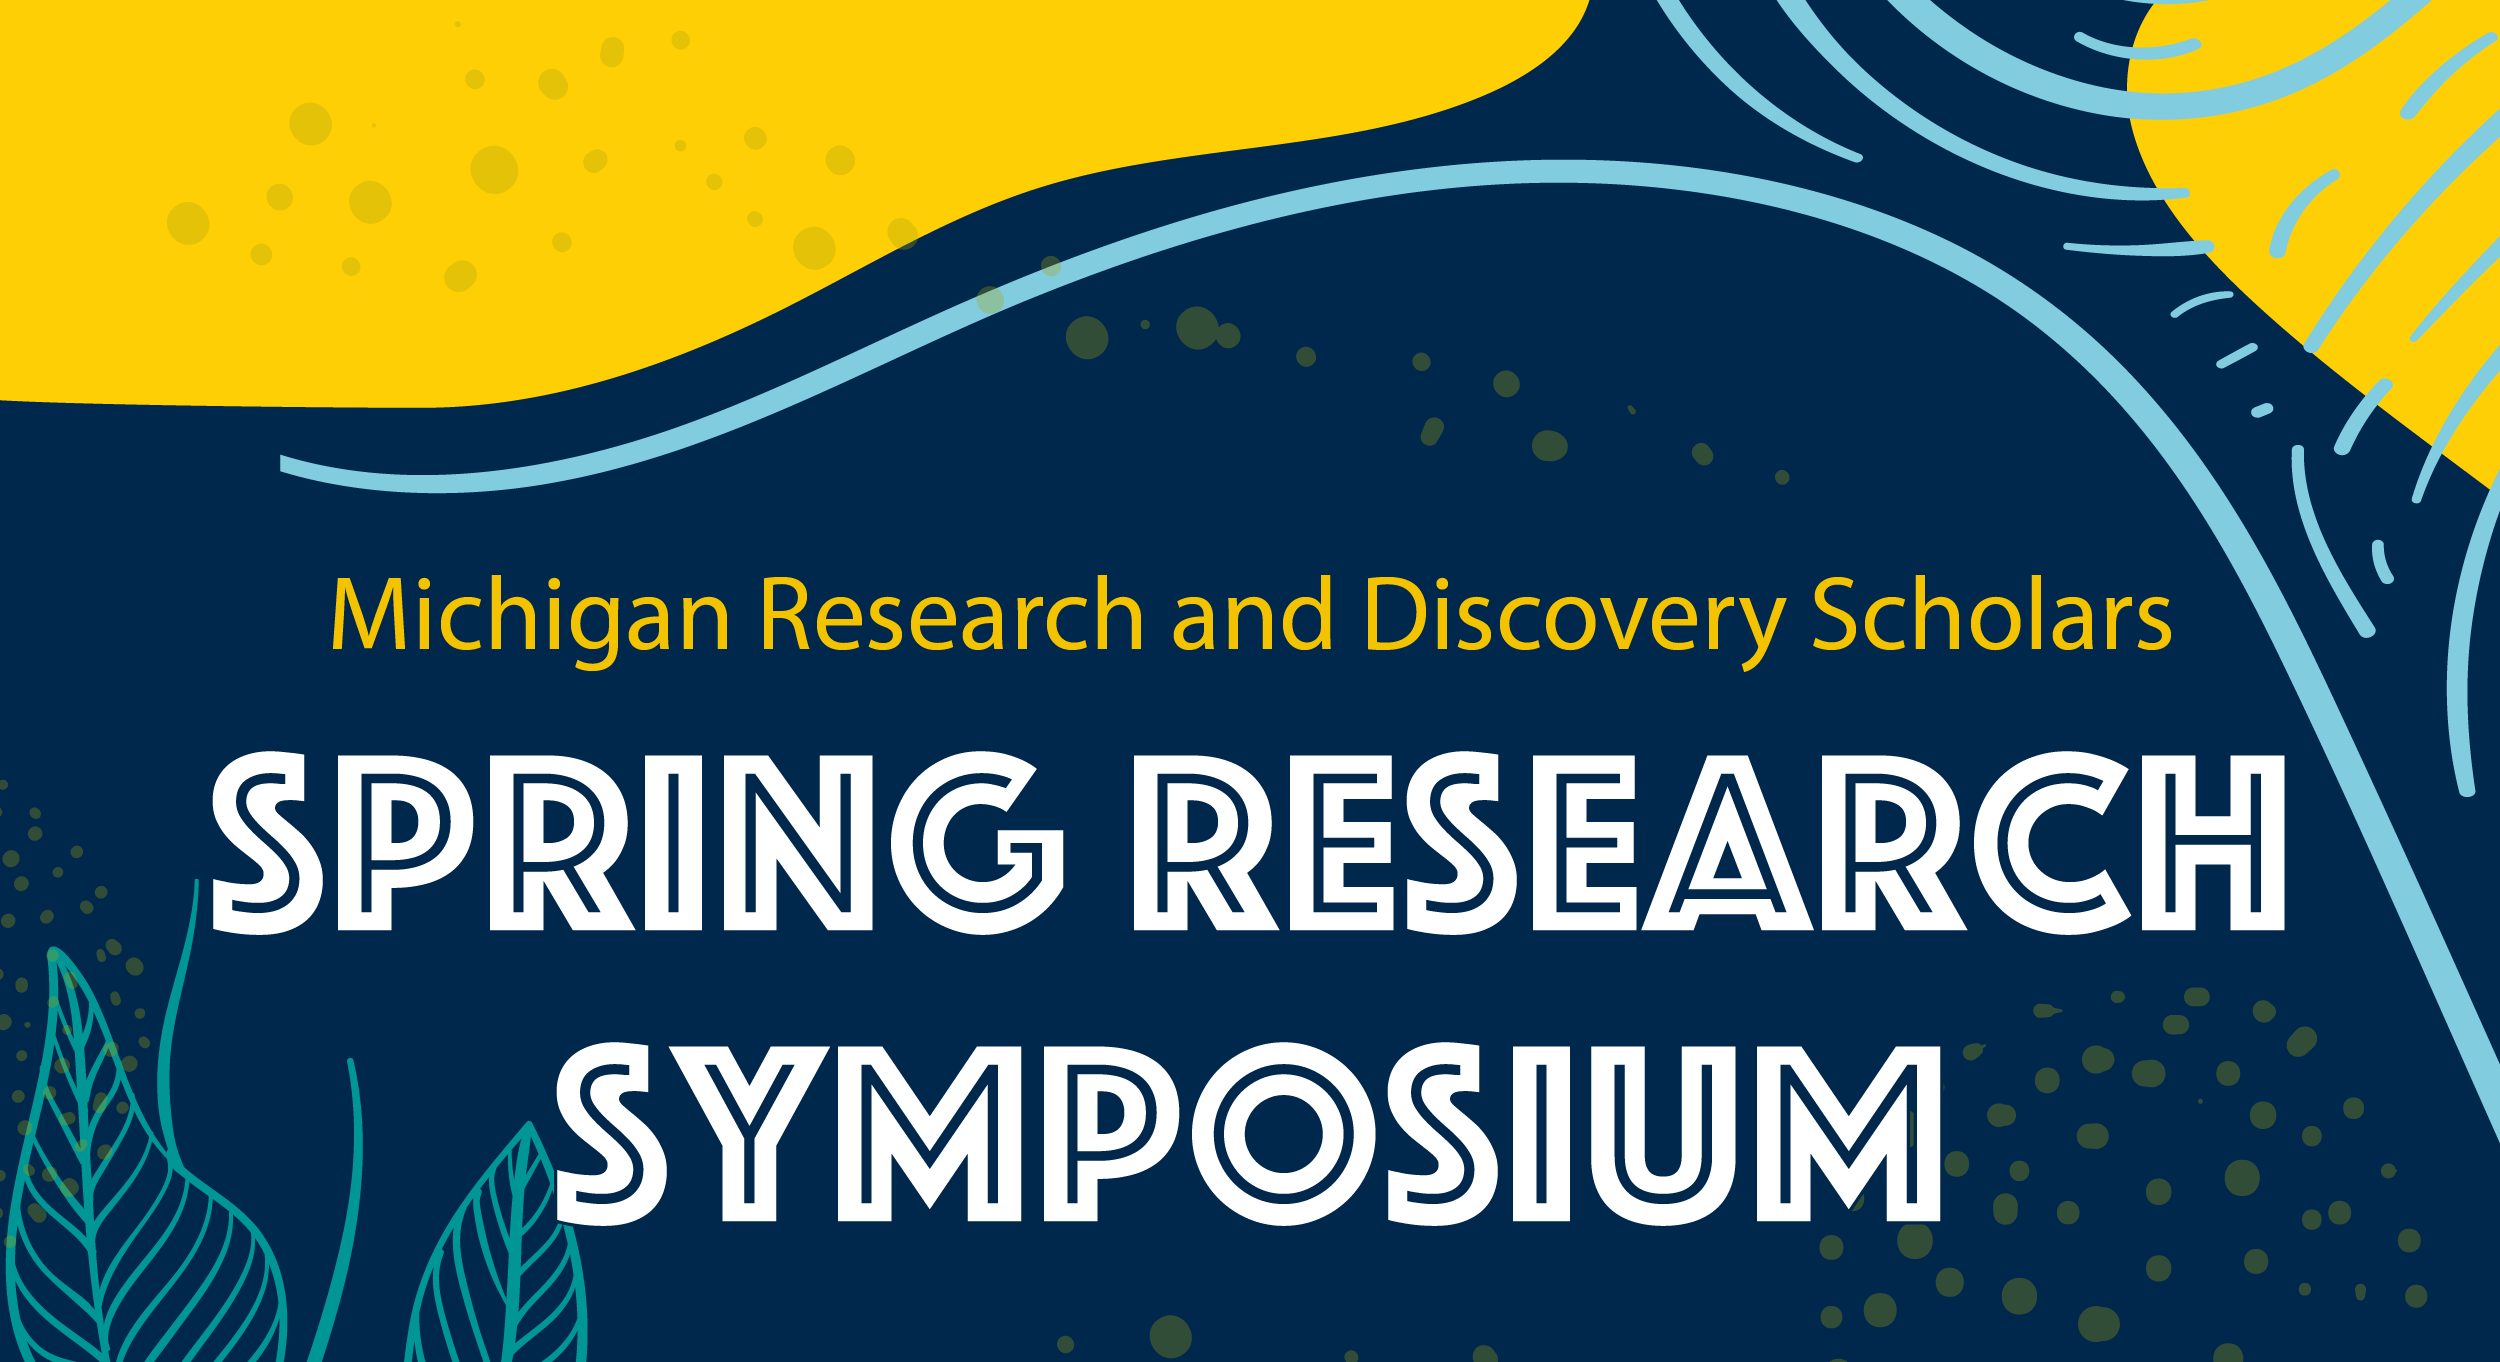 Decorative banner with text: "Michigan Research and Discovery Scholars Spring Research Symposium"